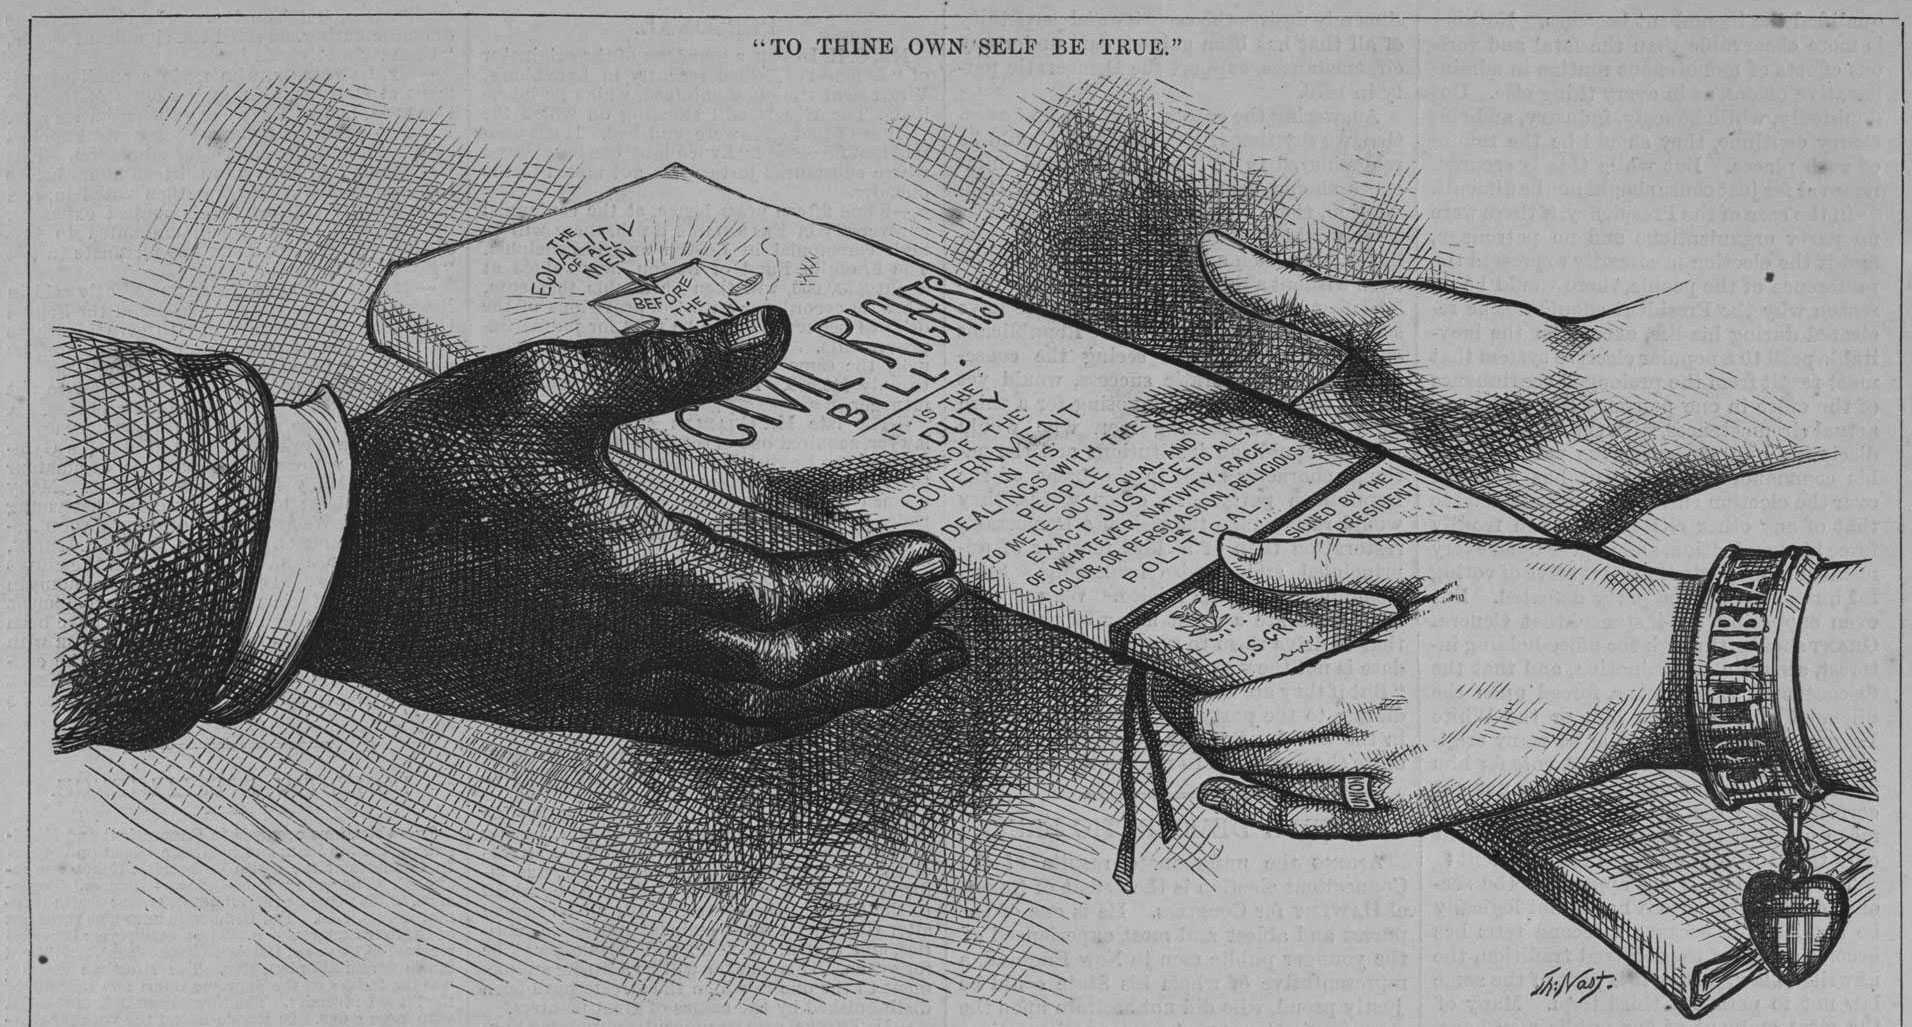 An illustration of someone handing off the Civil rights bill to an African American at the top of the page.